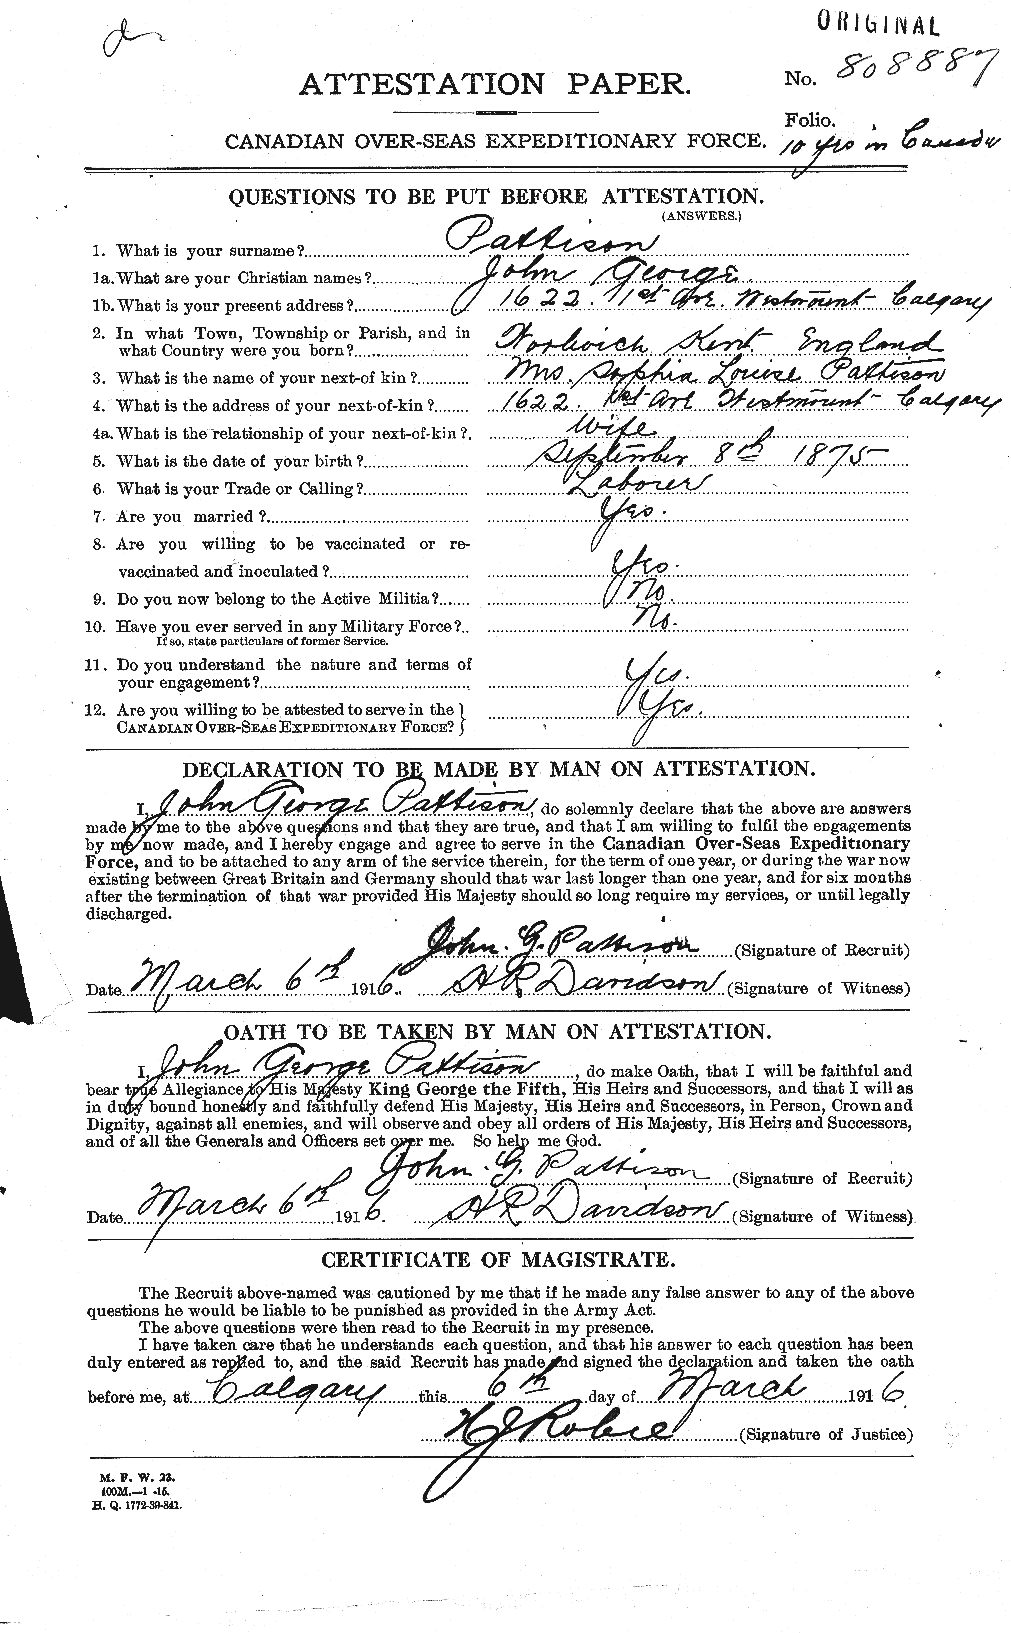 Personnel Records of the First World War - CEF 206309a